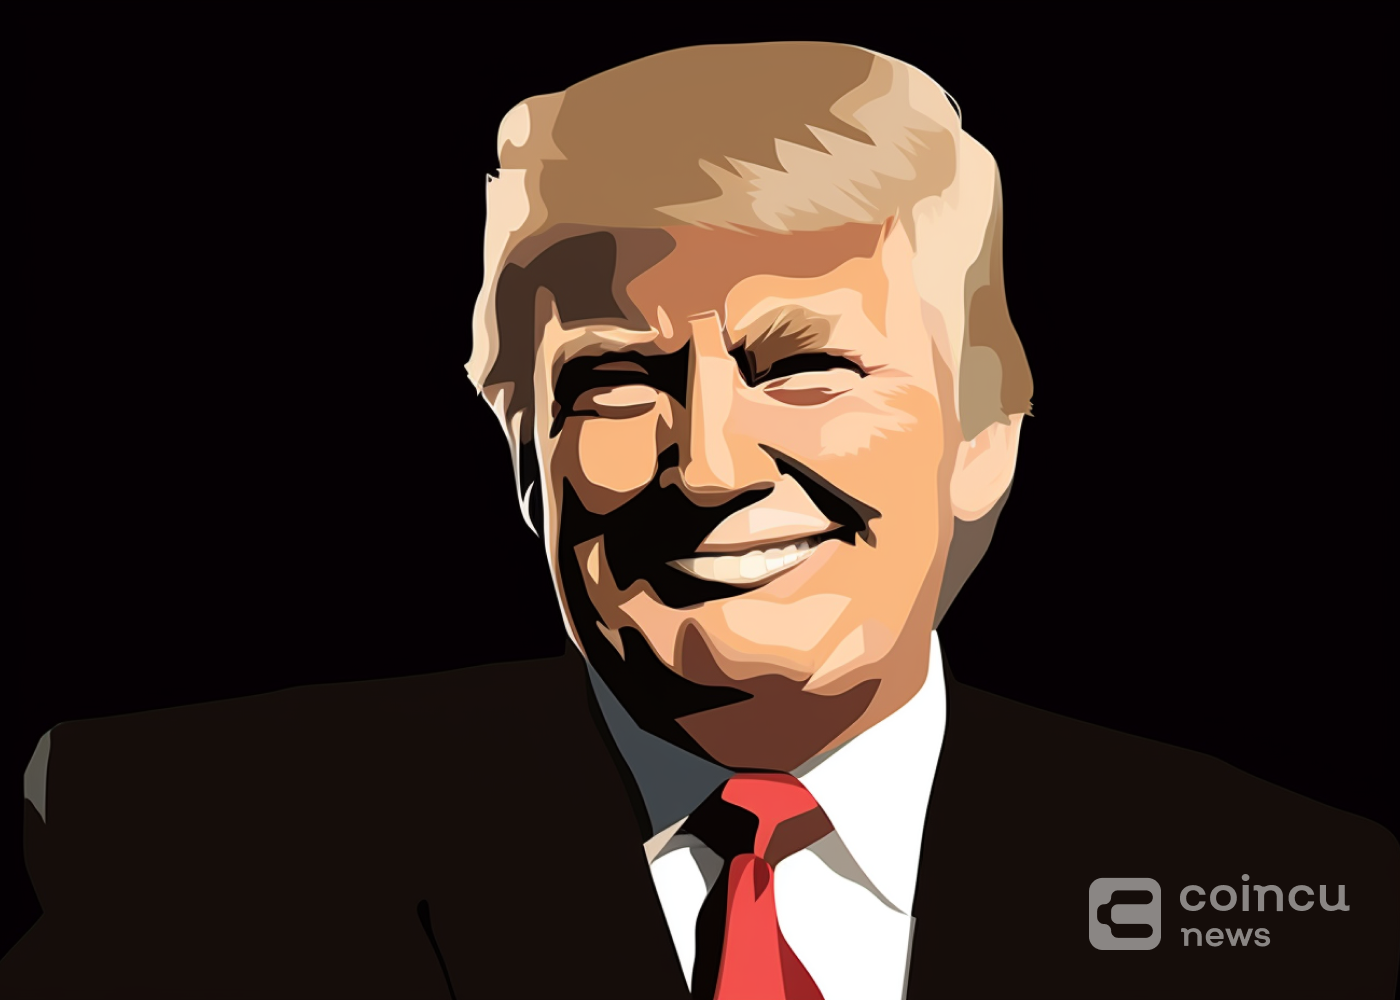 Former President Donald Trump Holds $250,000 In ETH, Financial Report Discloses